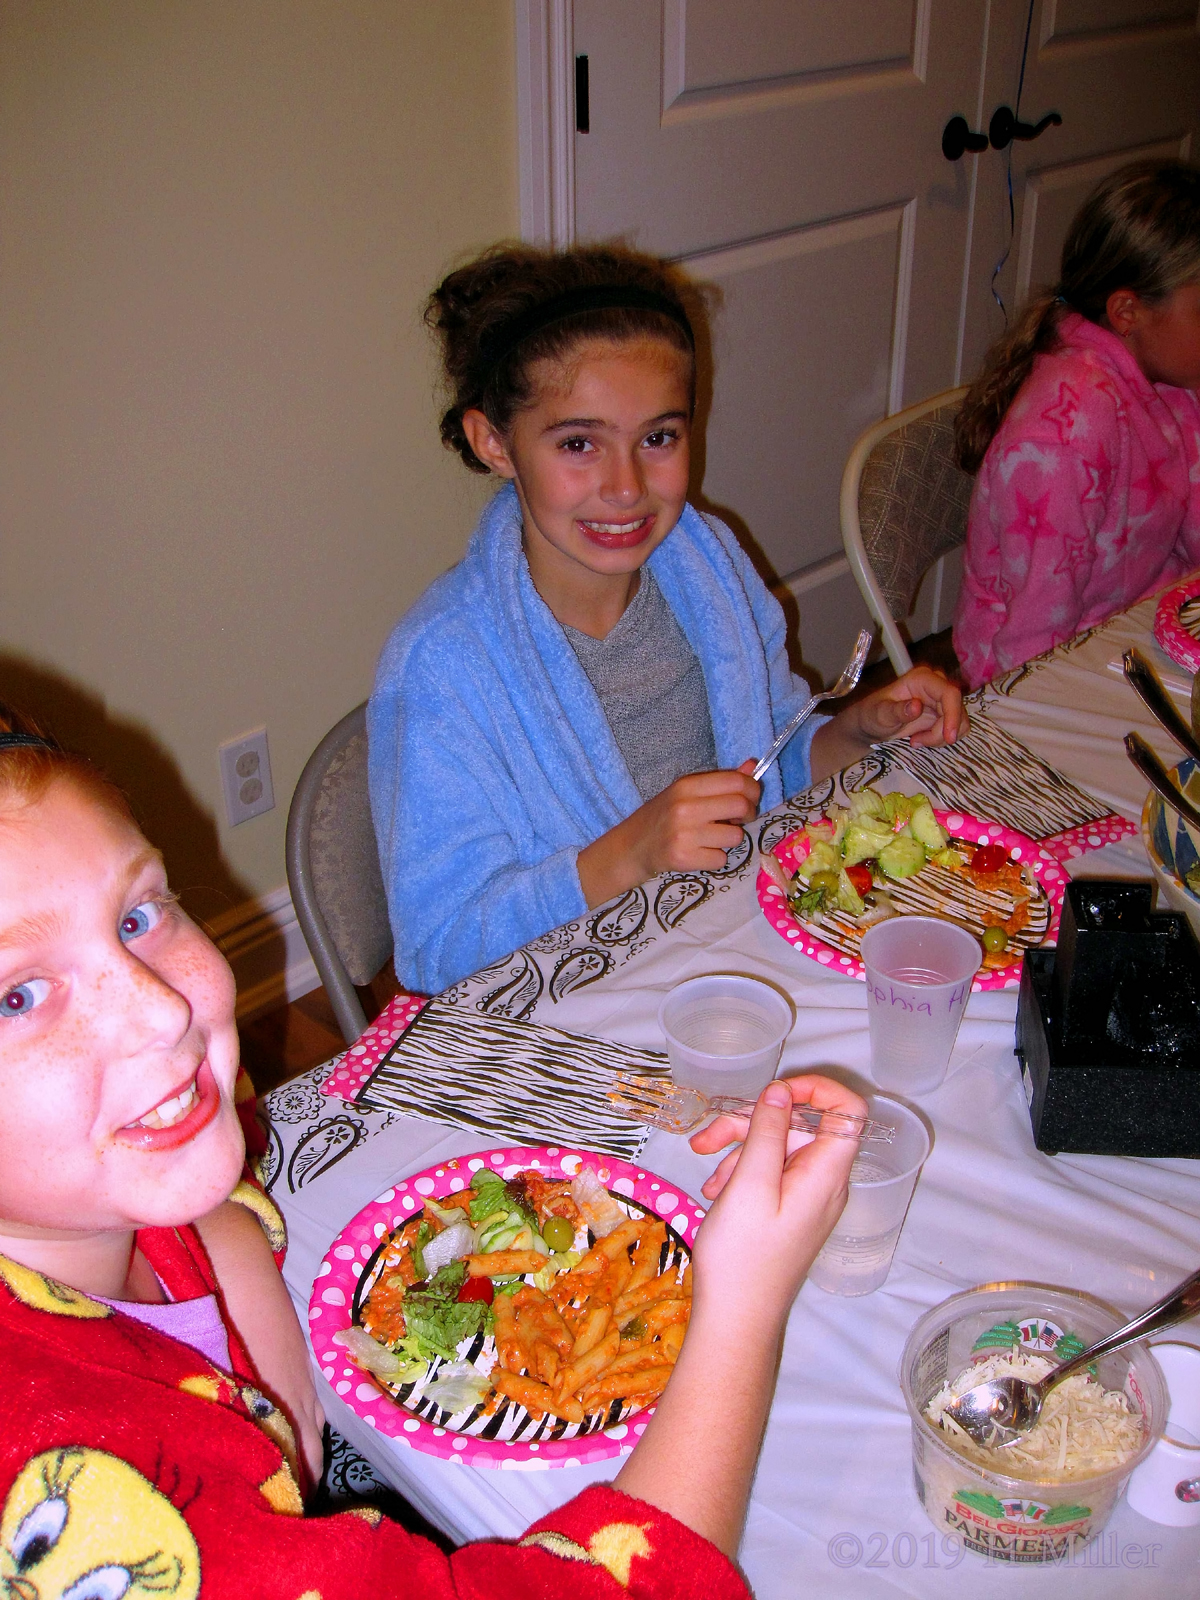 Salads And Smiles! Spa Party Guests Enjoy Salad! 